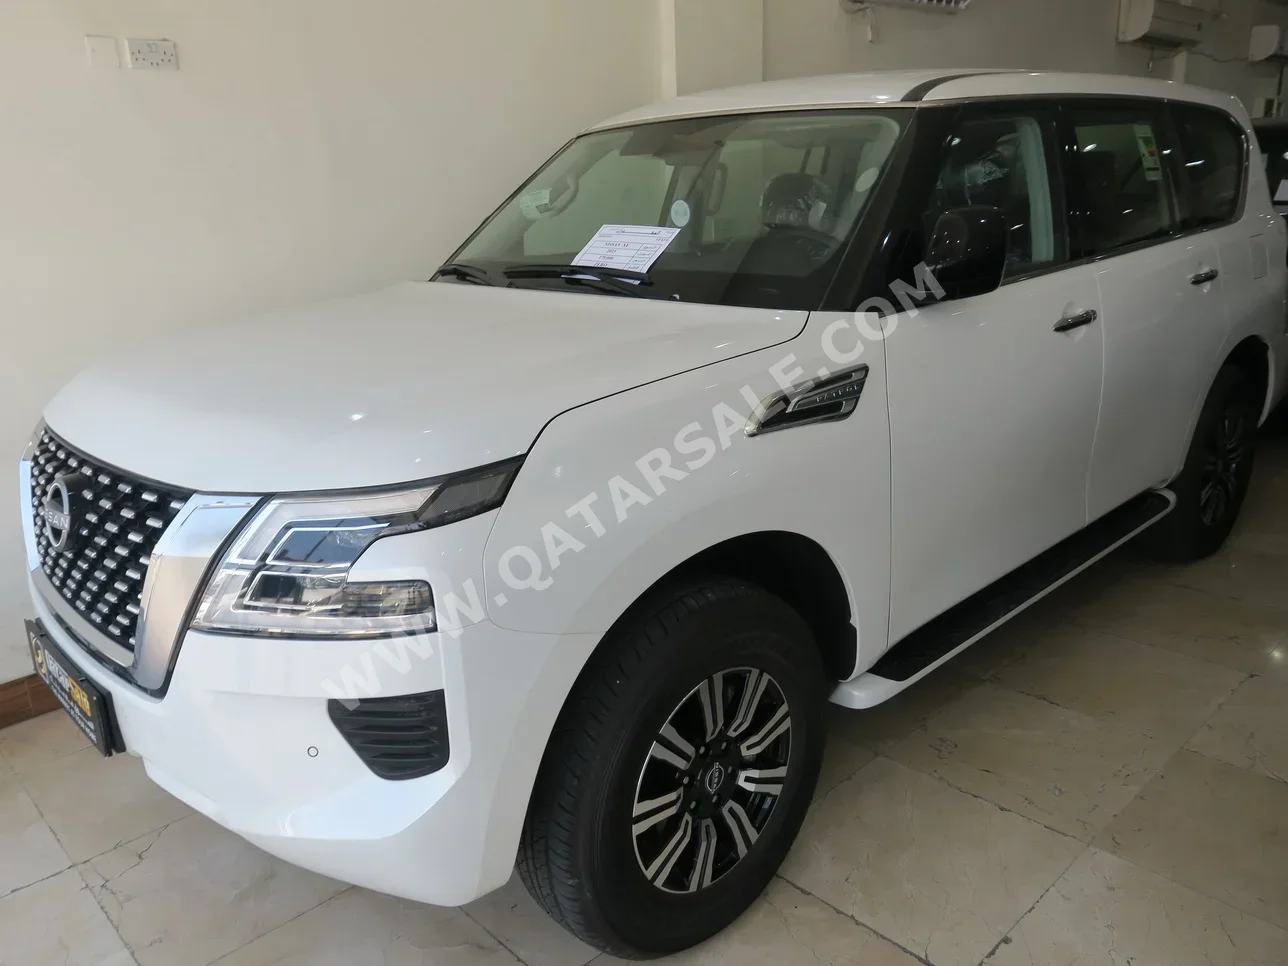  Nissan  Patrol  XE  2023  Automatic  0 Km  6 Cylinder  Four Wheel Drive (4WD)  SUV  White  With Warranty